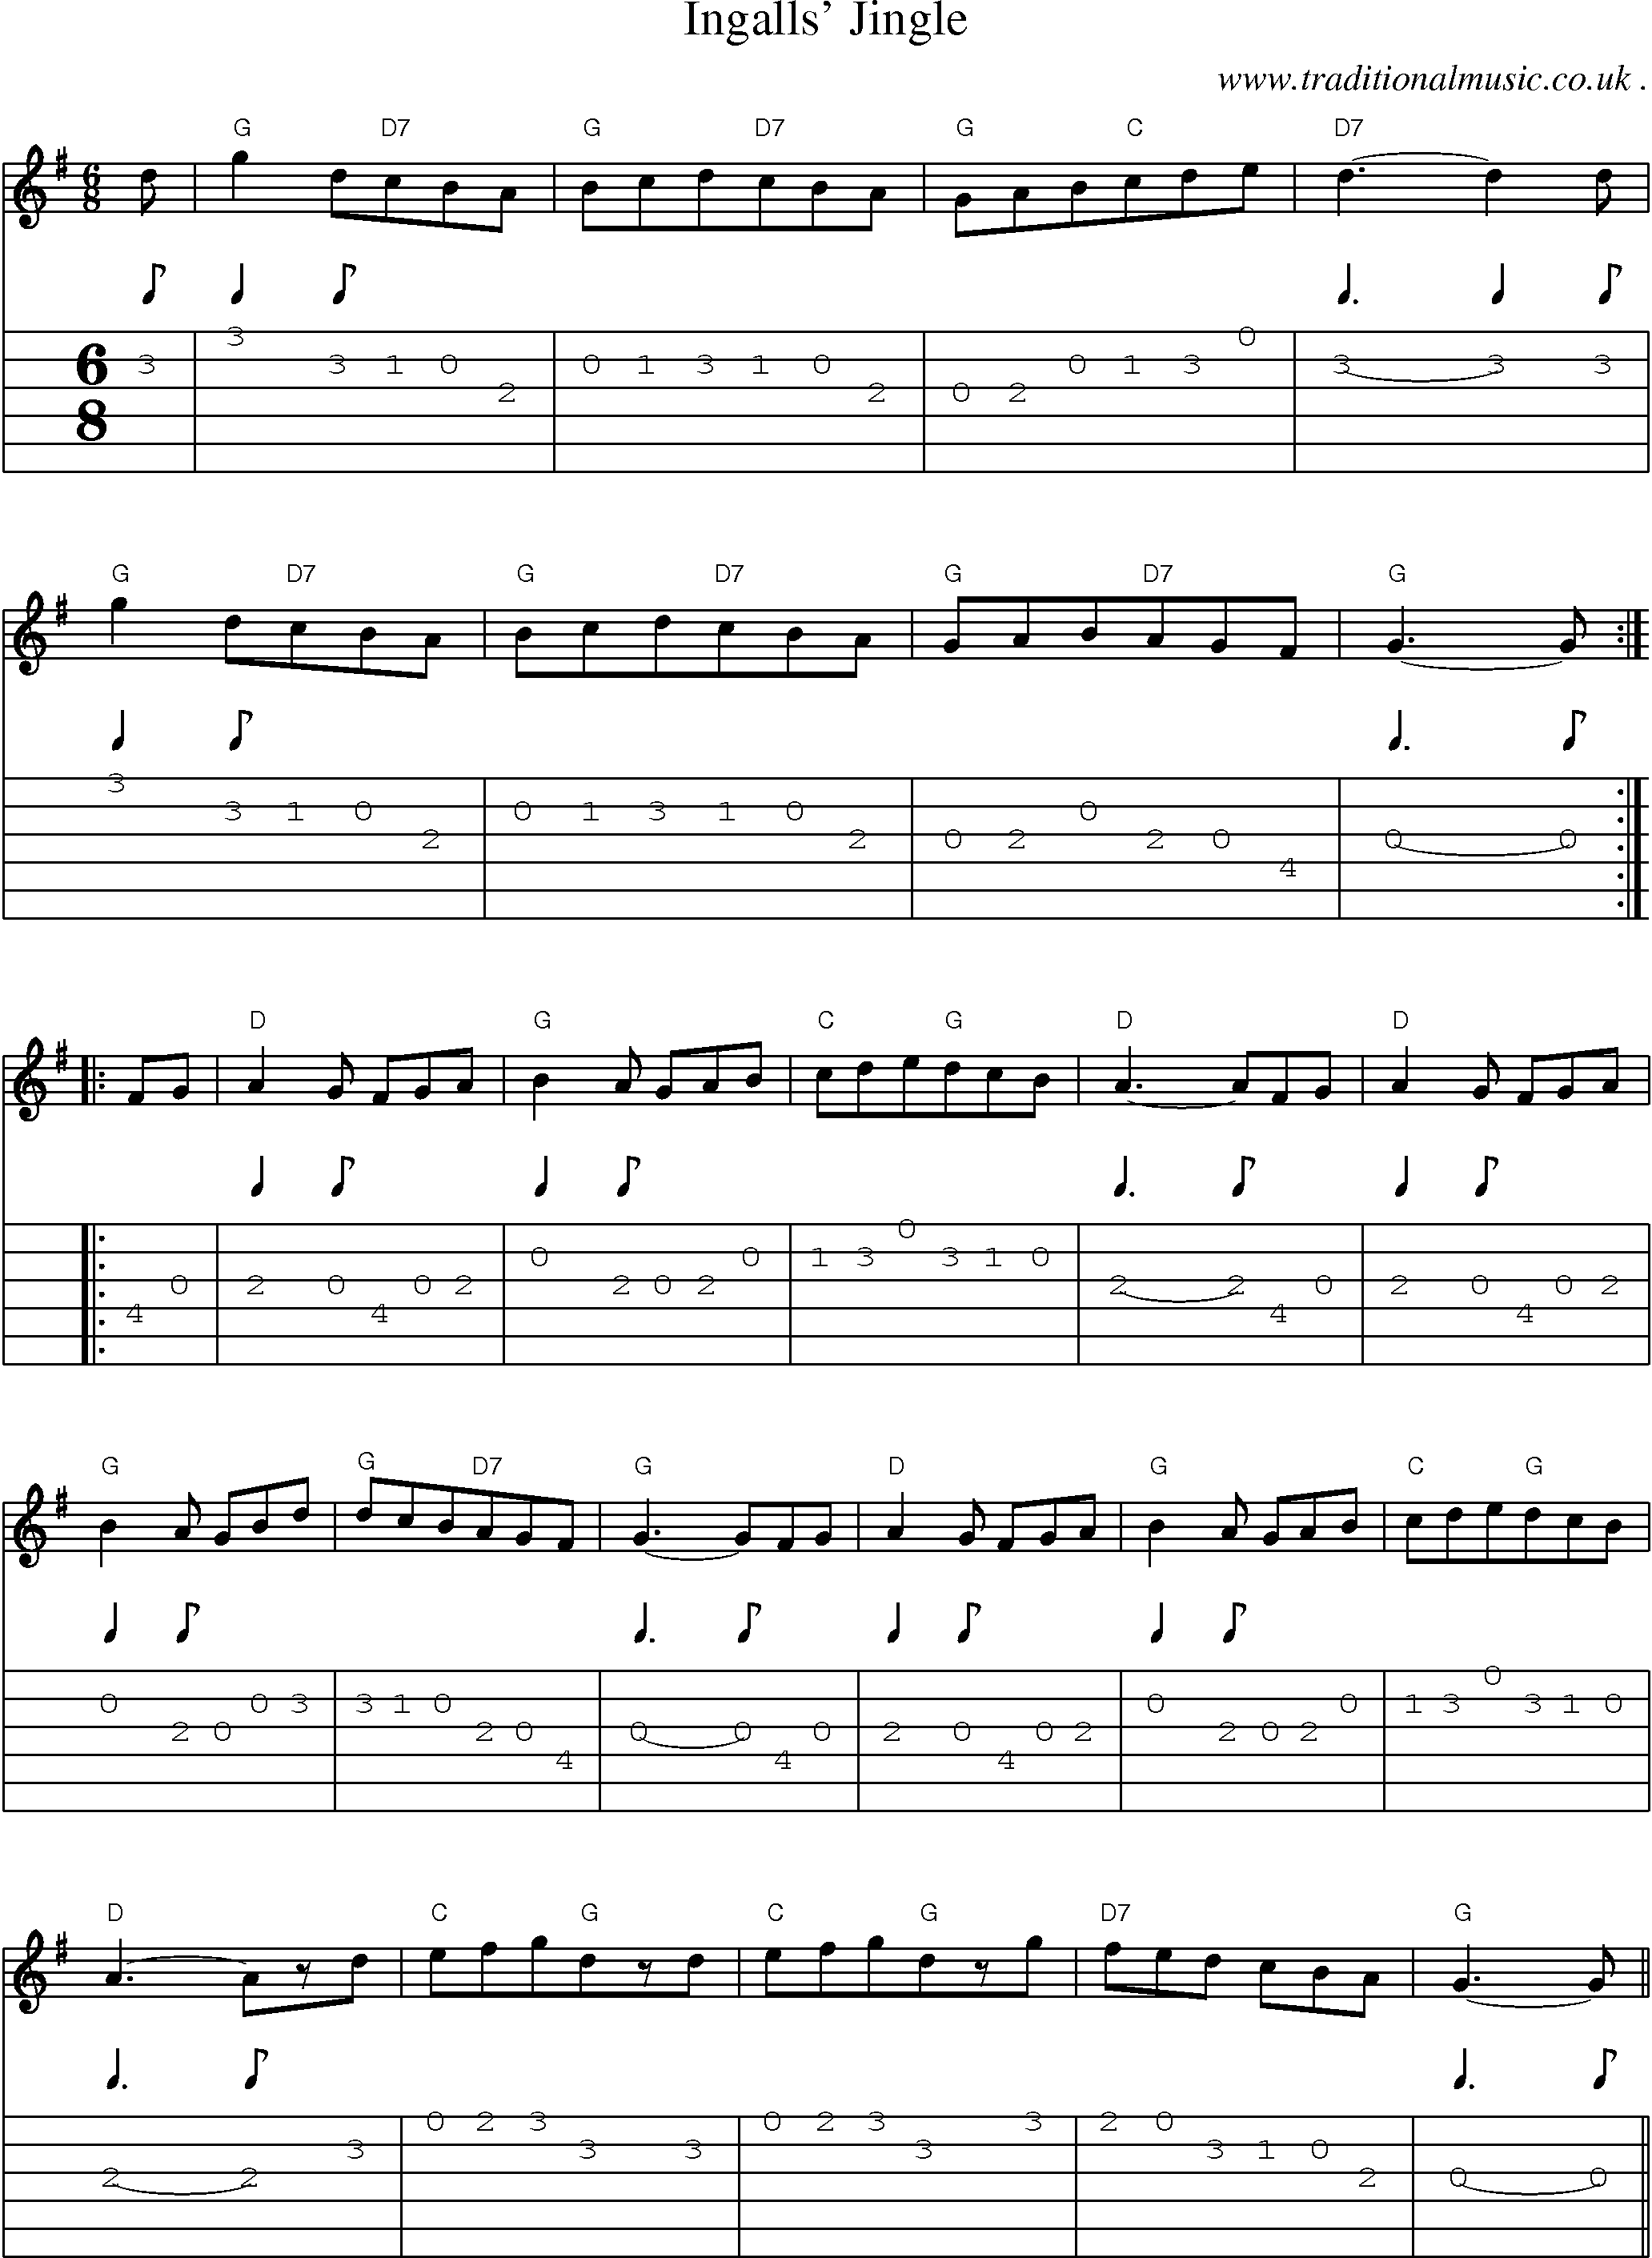 Sheet-Music and Guitar Tabs for Ingalls Jingle